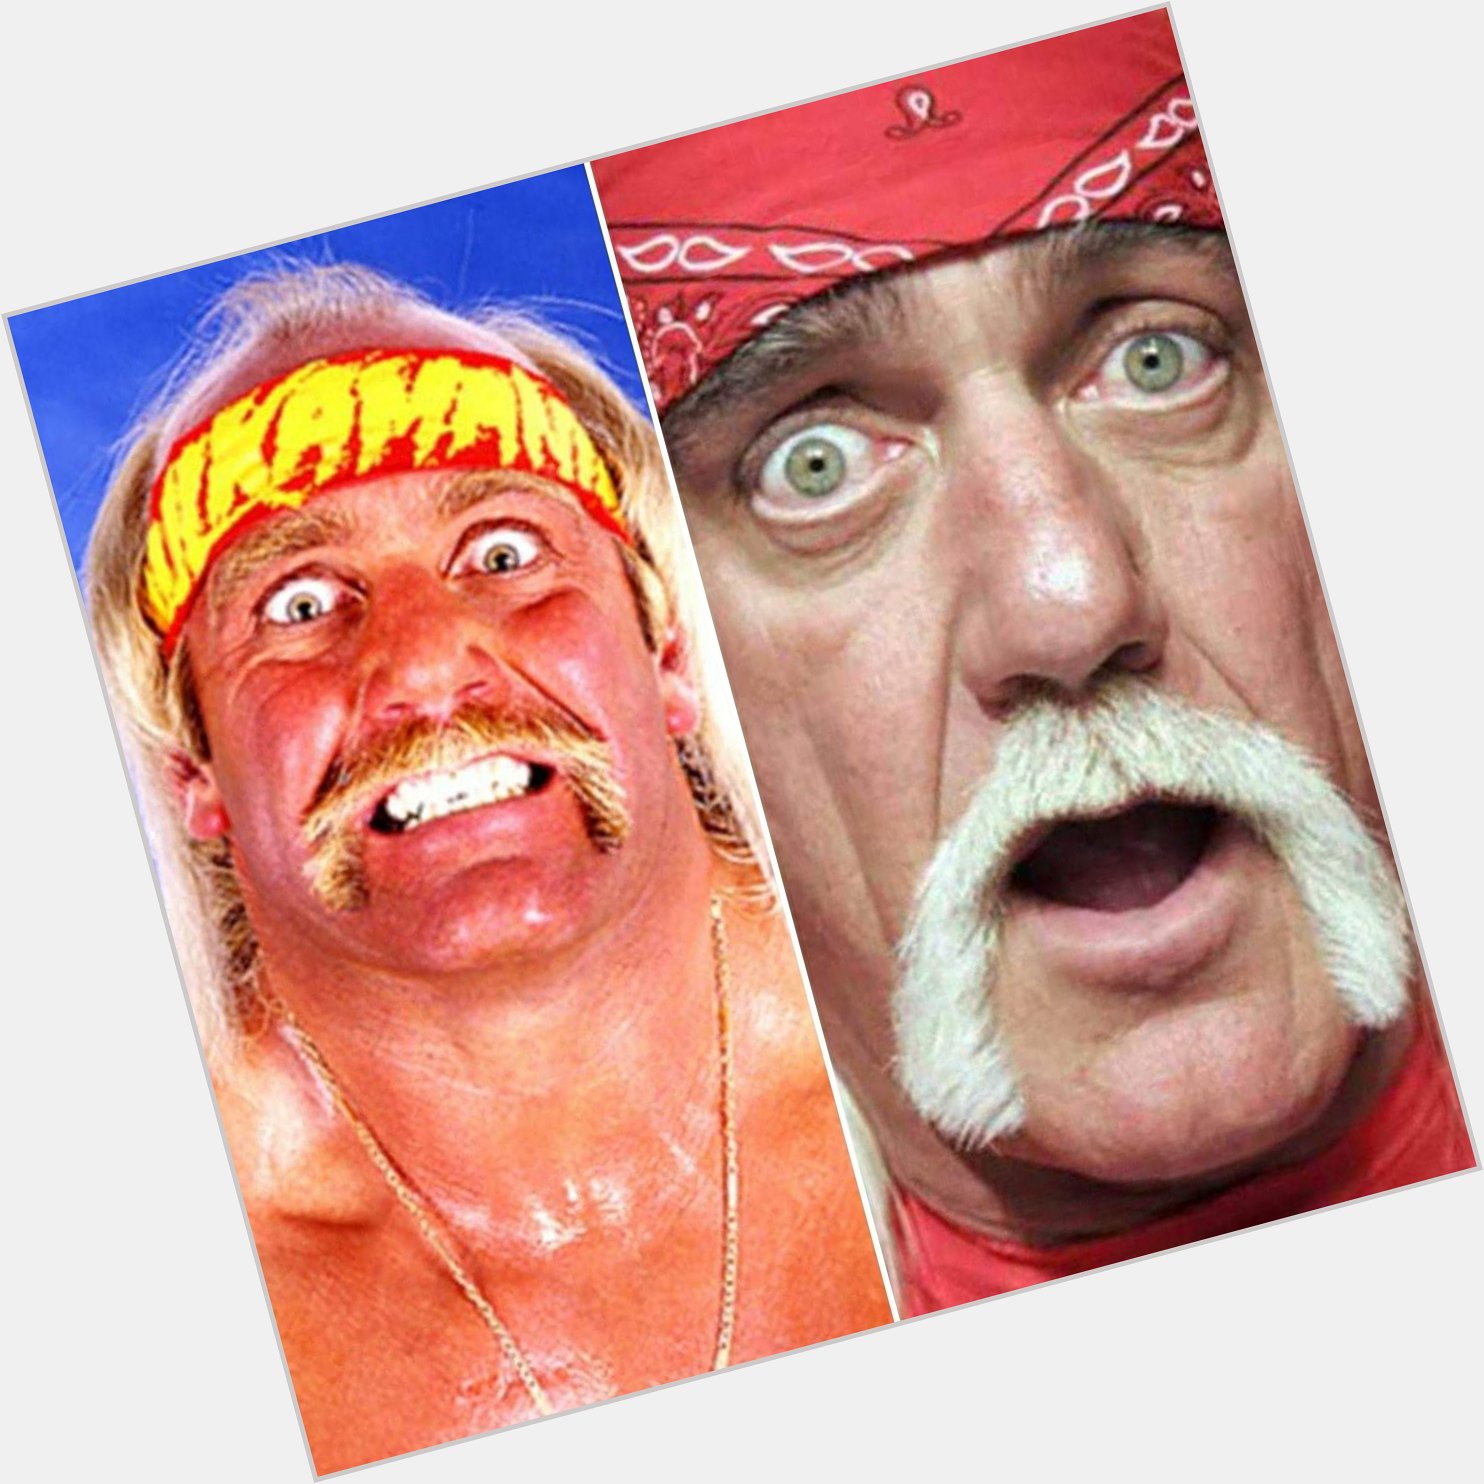 Happy belated 67th birthday, hulk hogan ! Would 80s pro wrestling have thrived without him ? 